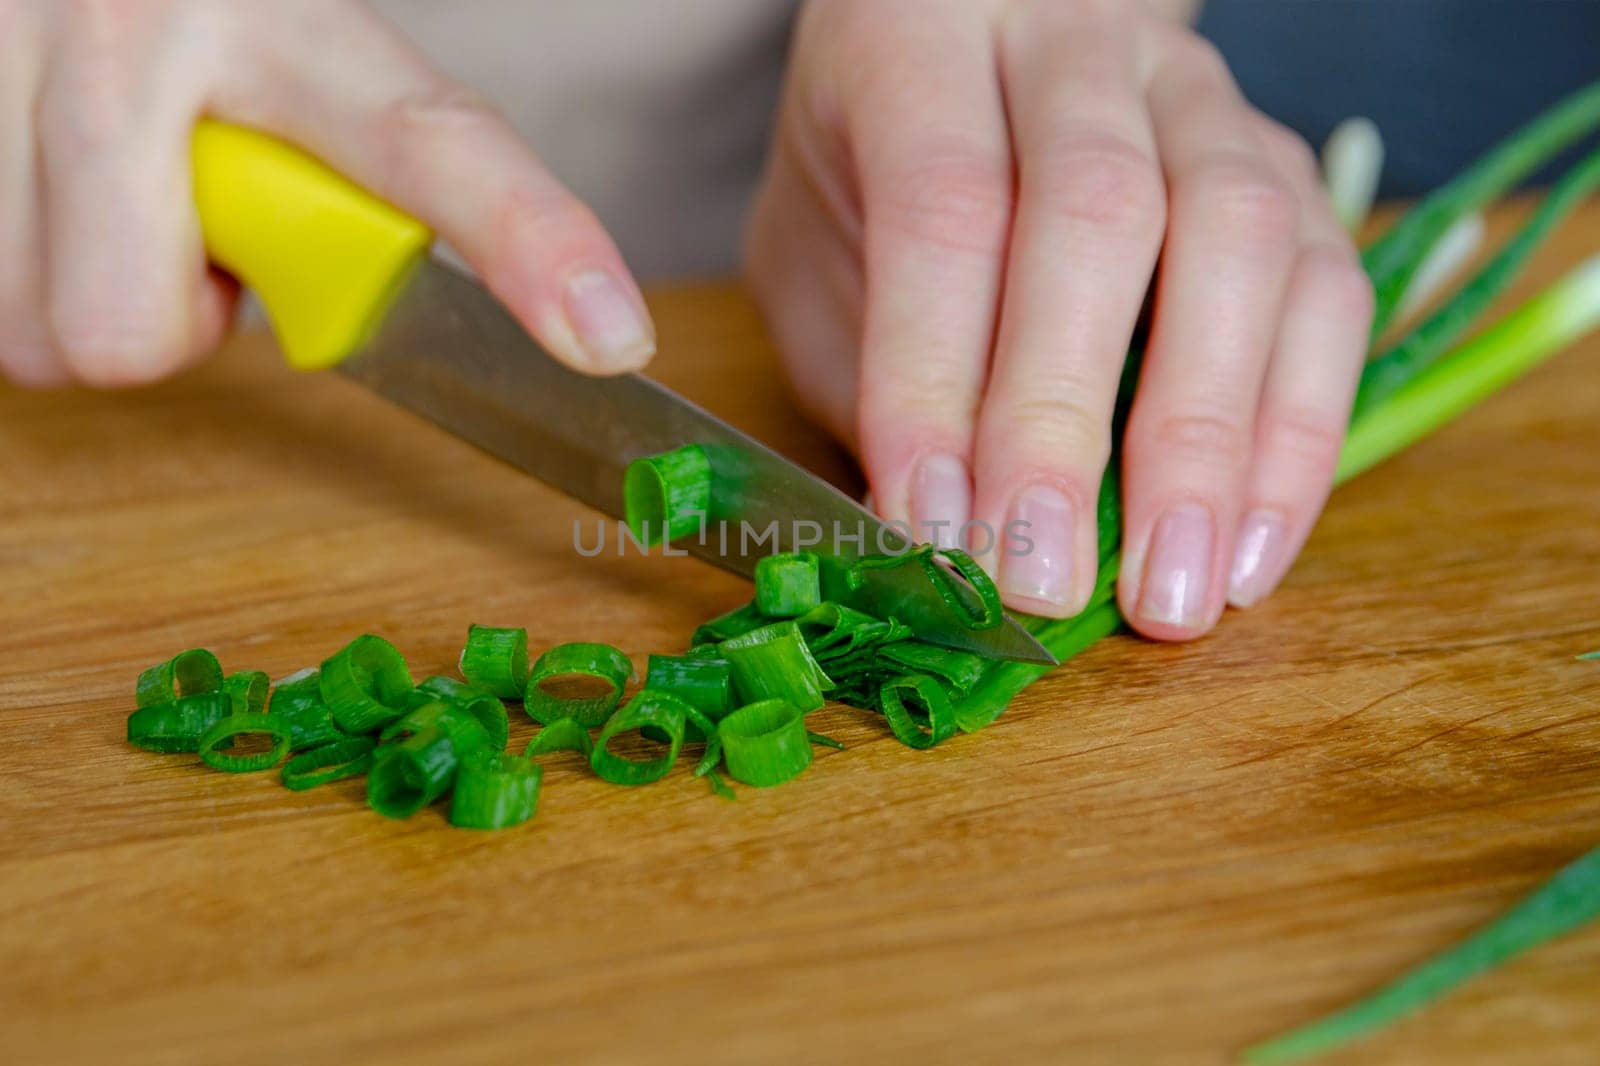 The process of preparing salad. A woman's hand chops a green onion close-up. Salad is used as a side dish for meals. High quality photo by SERSOL